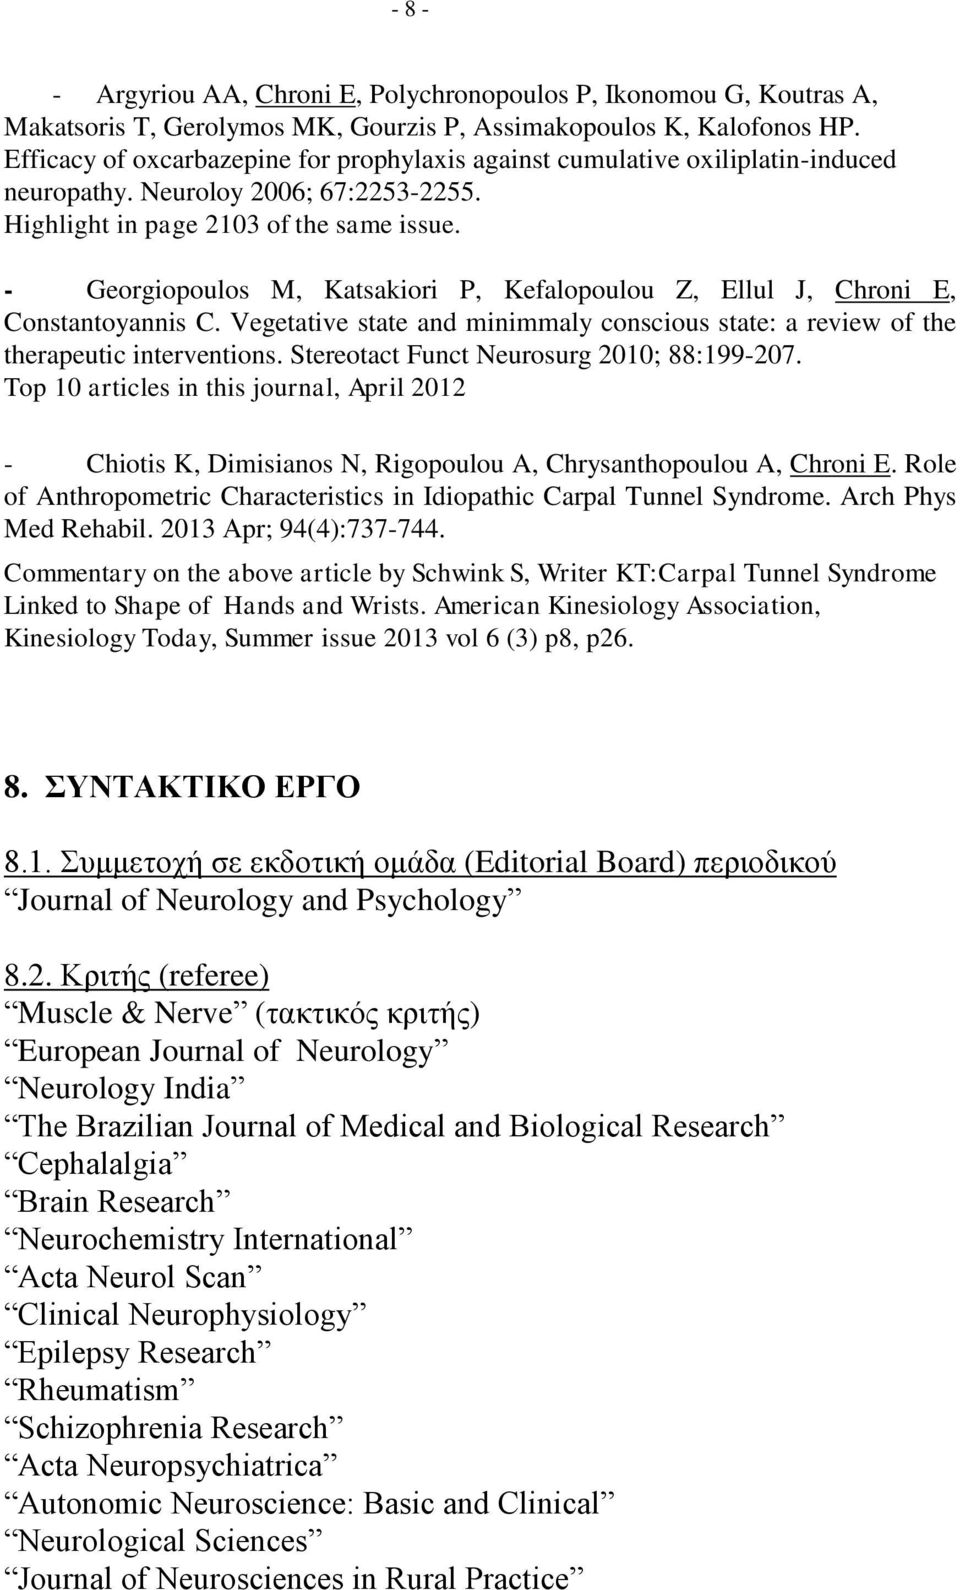 - Georgiopoulos M, Katsakiori P, Kefalopoulou Z, Ellul J, Chroni E, Constantoyannis C. Vegetative state and minimmaly conscious state: a review of the therapeutic interventions.